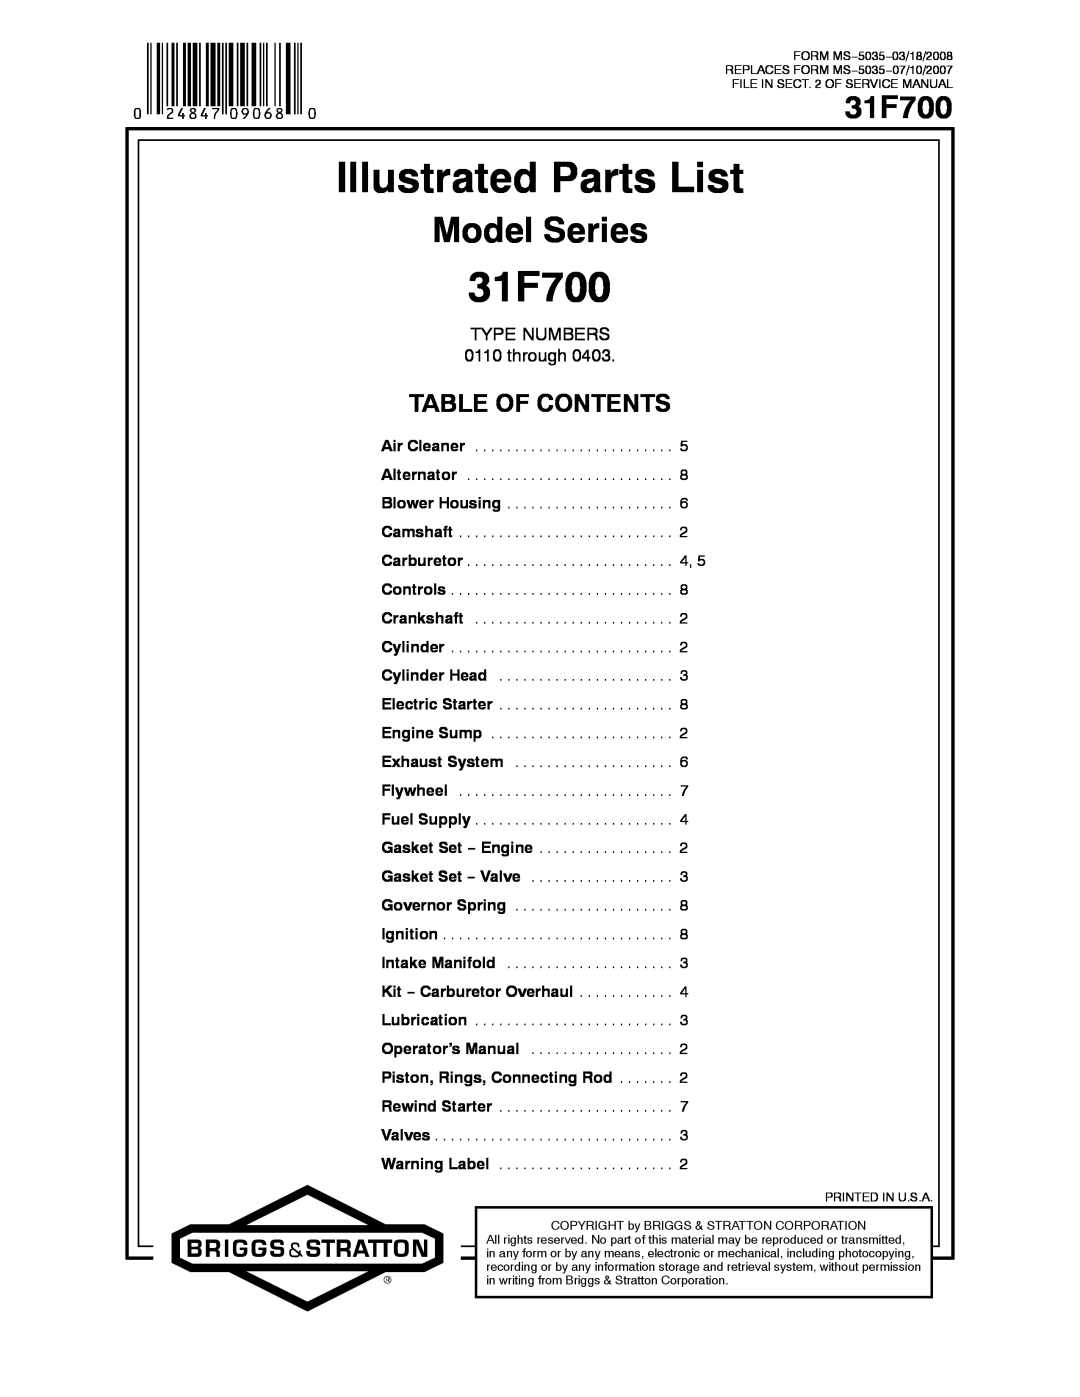 Briggs & Stratton 31F700 Series service manual Illustrated Parts List, Model Series, Table Of Contents 